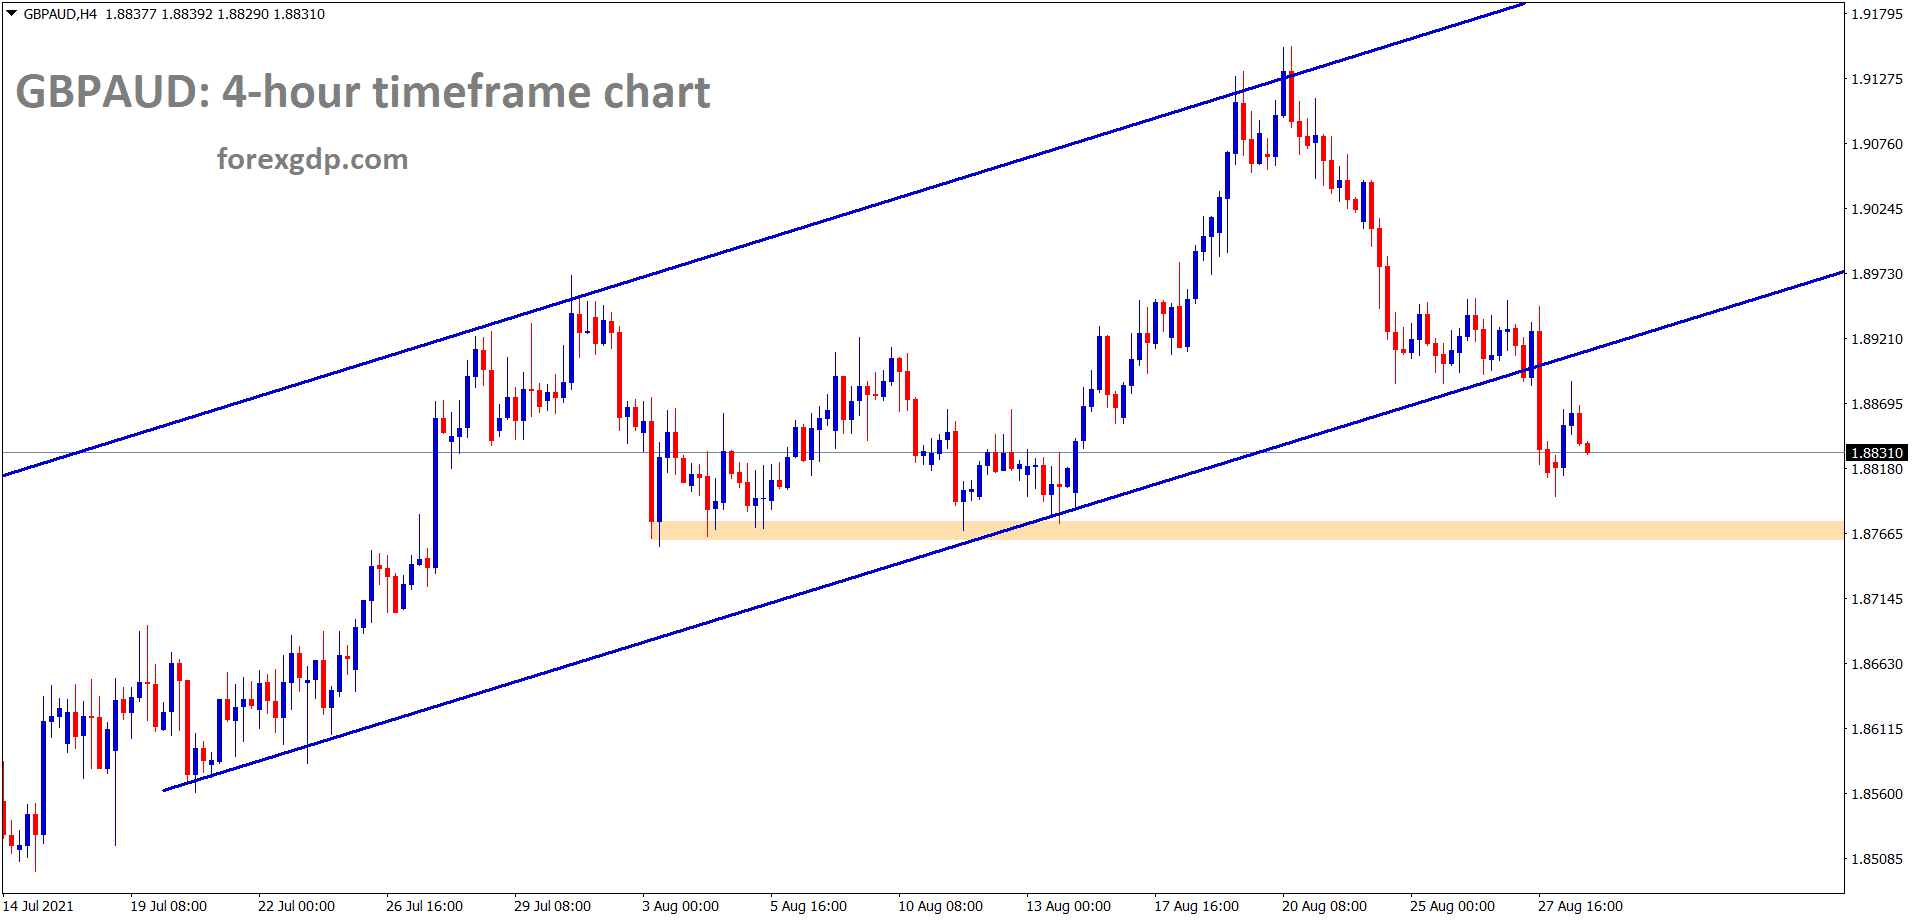 GBPAUD has broken the bottom level of the uptrend line now its trying to test the horizontal support area